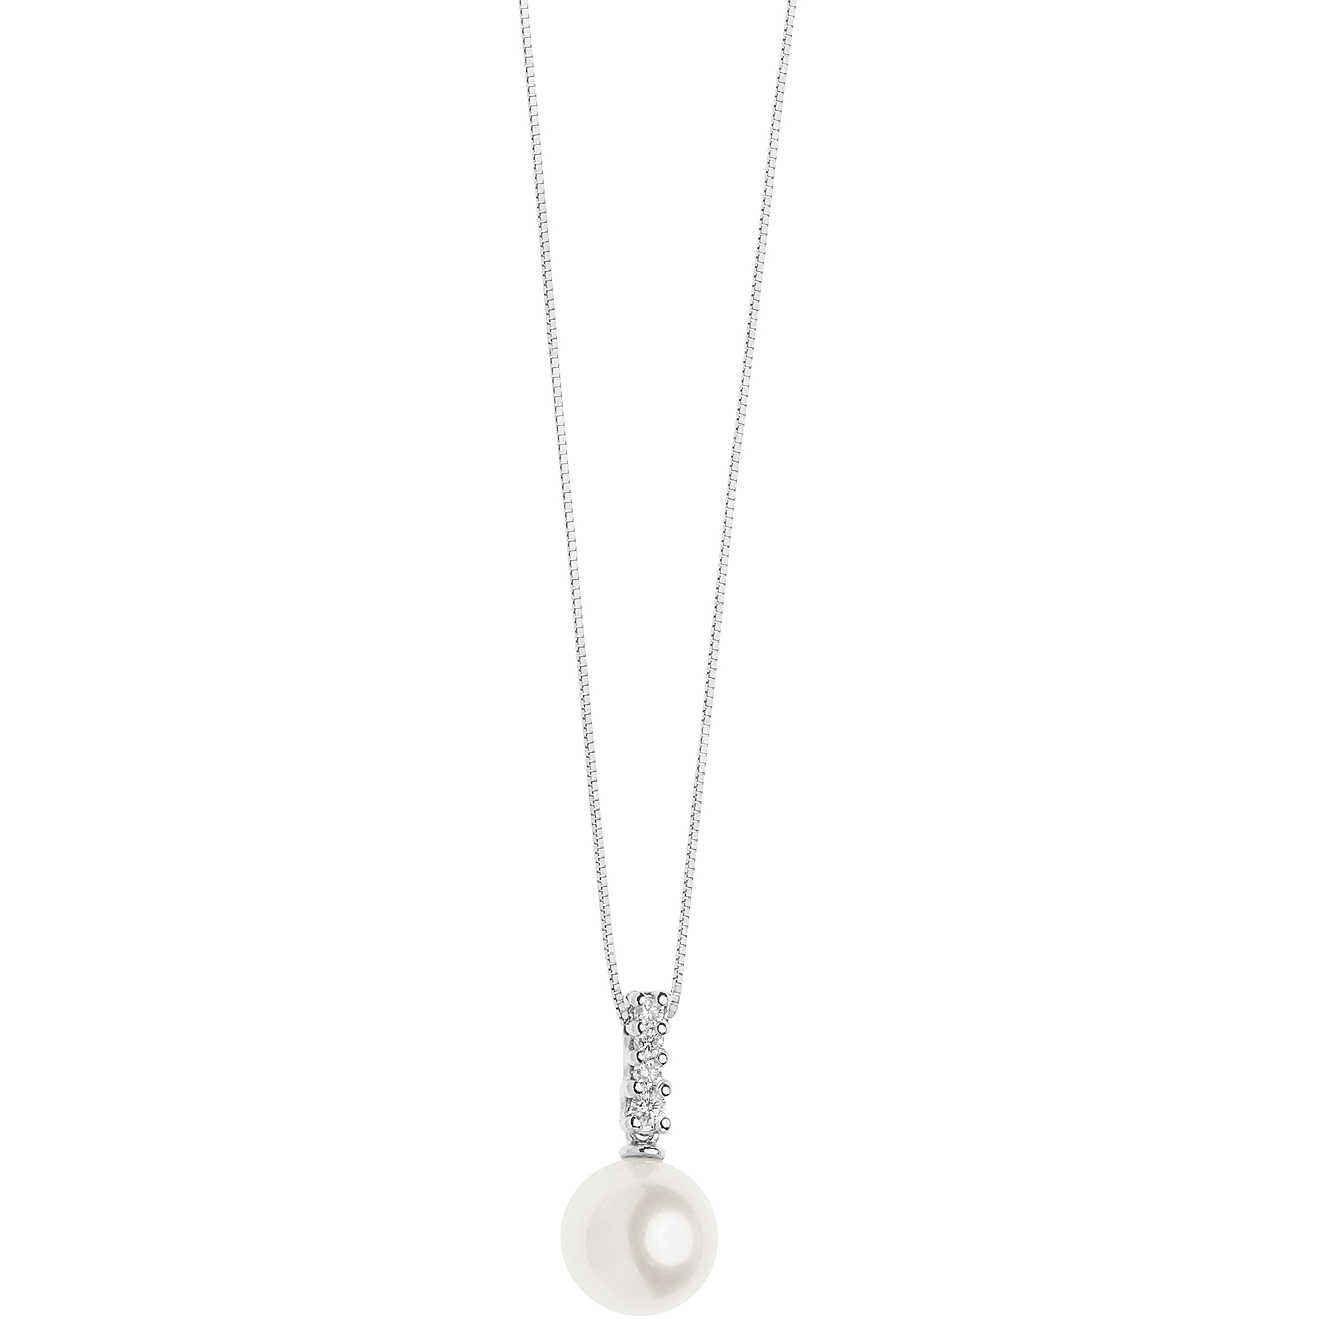 GLP 573 White Gold And Pearl Necklace For Women